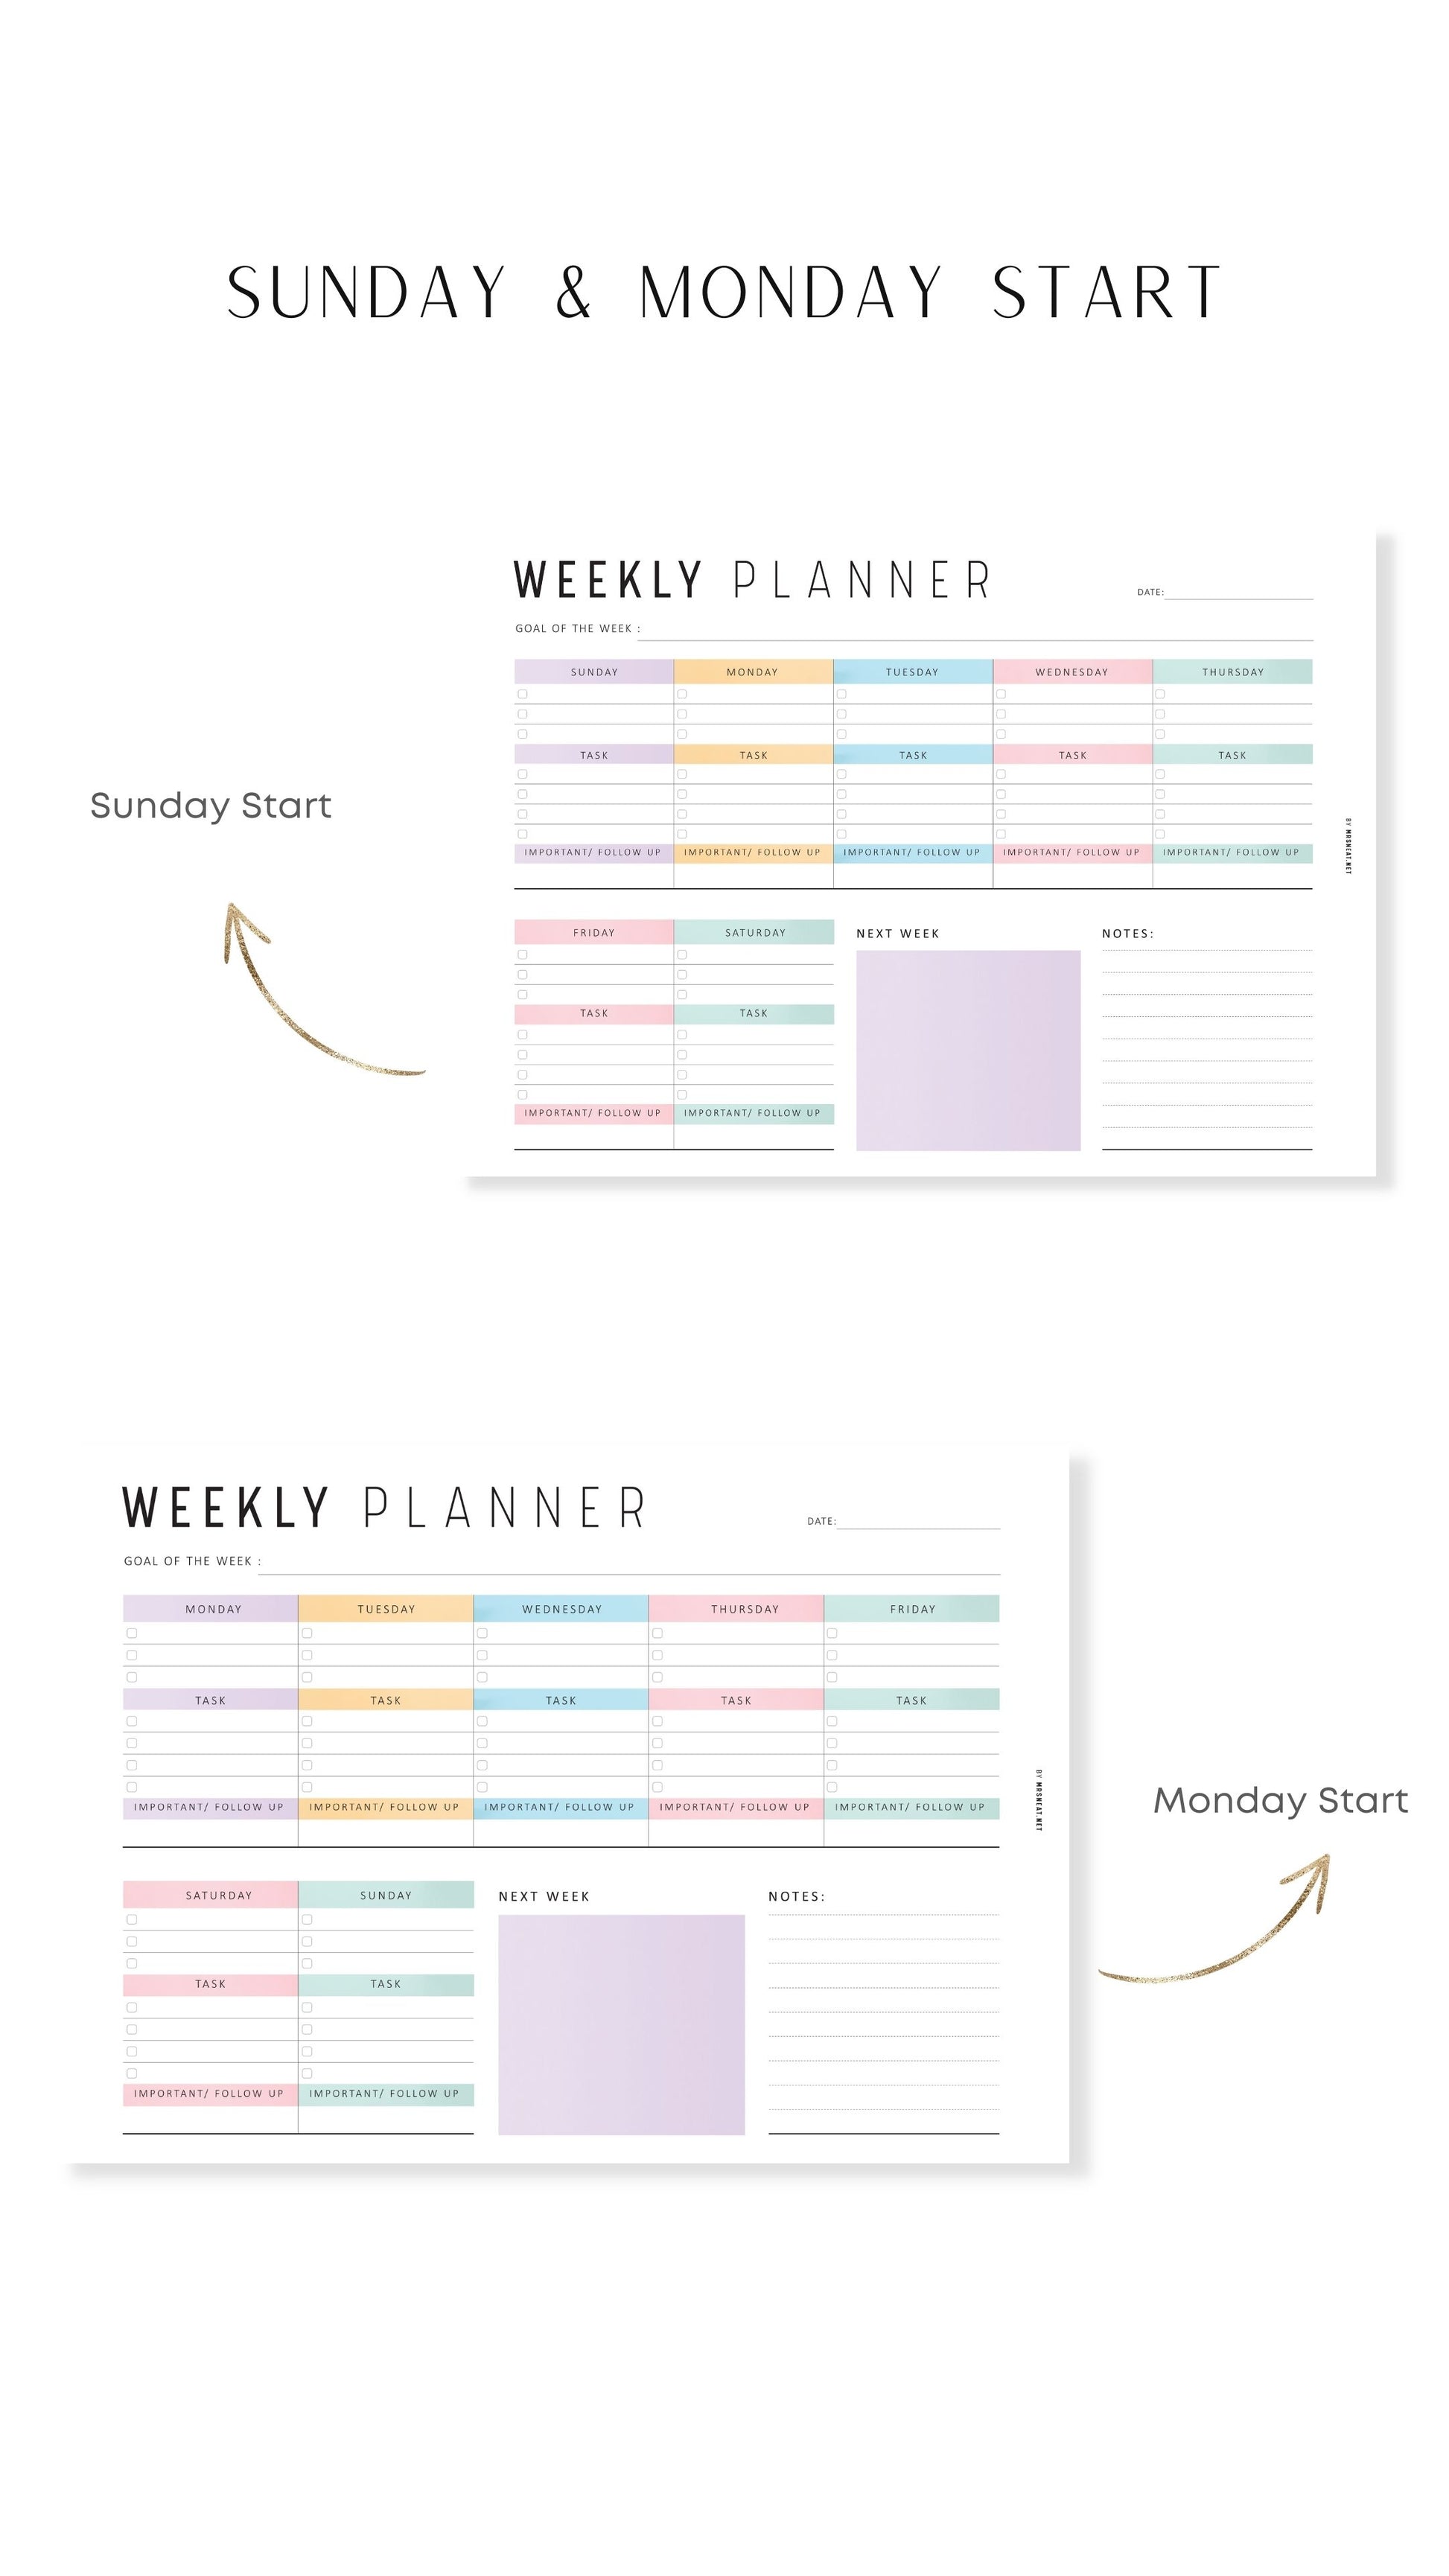 Sunday and Monday Start Weekly Planner Template